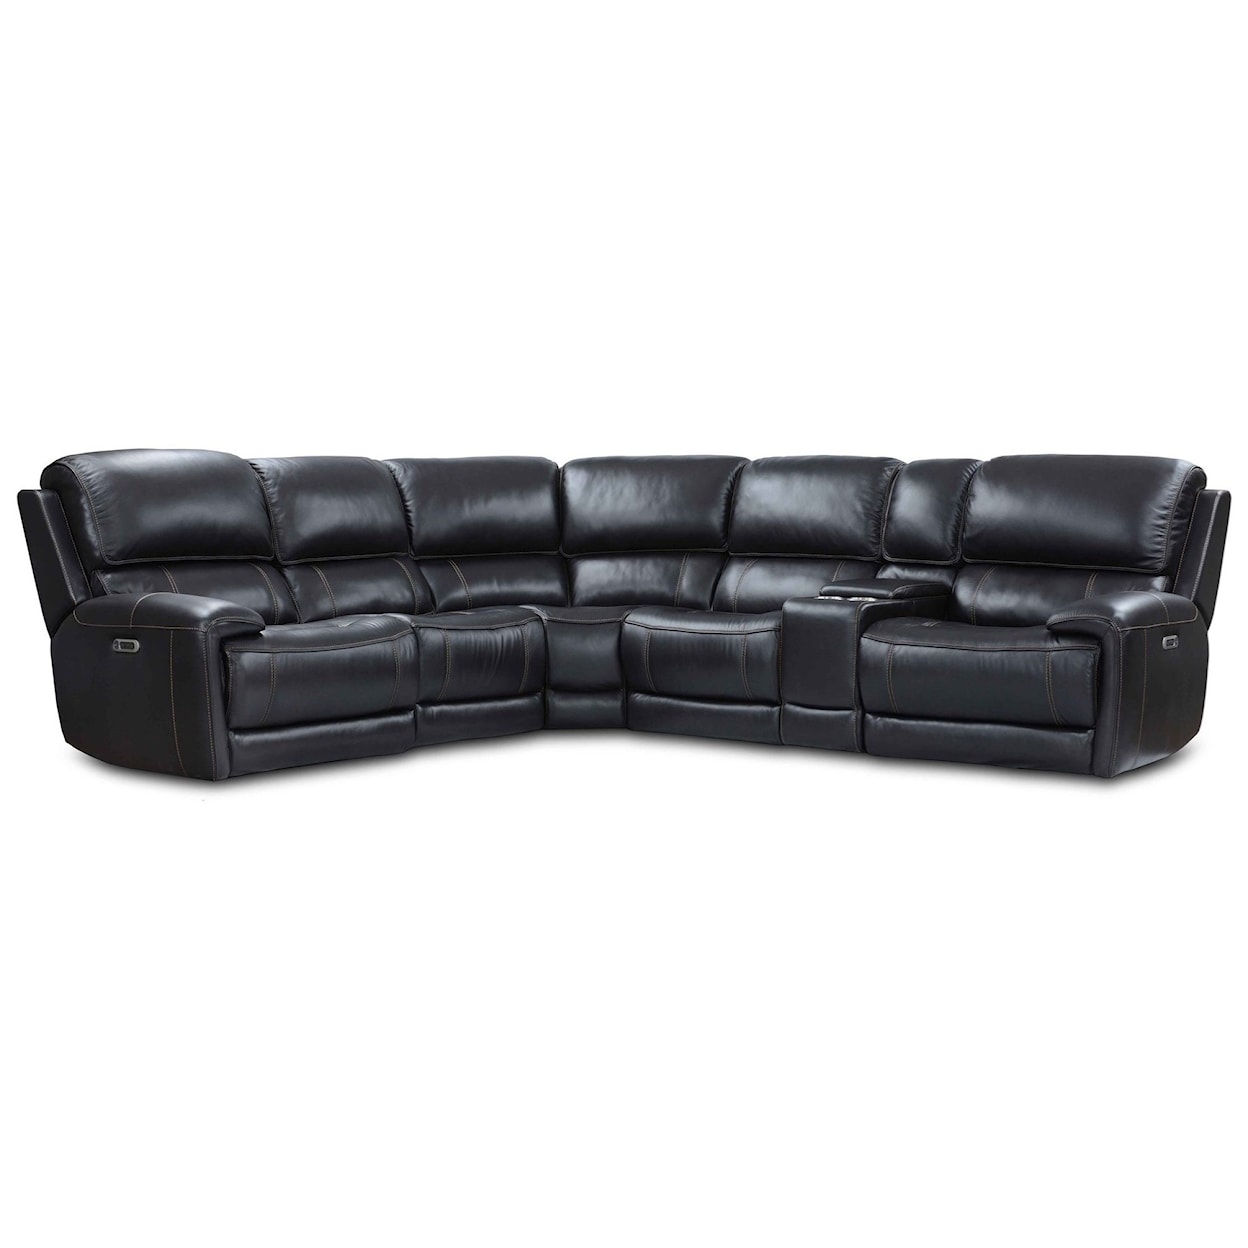 Paramount Living Empire 6-Piece Power Reclining Sectional